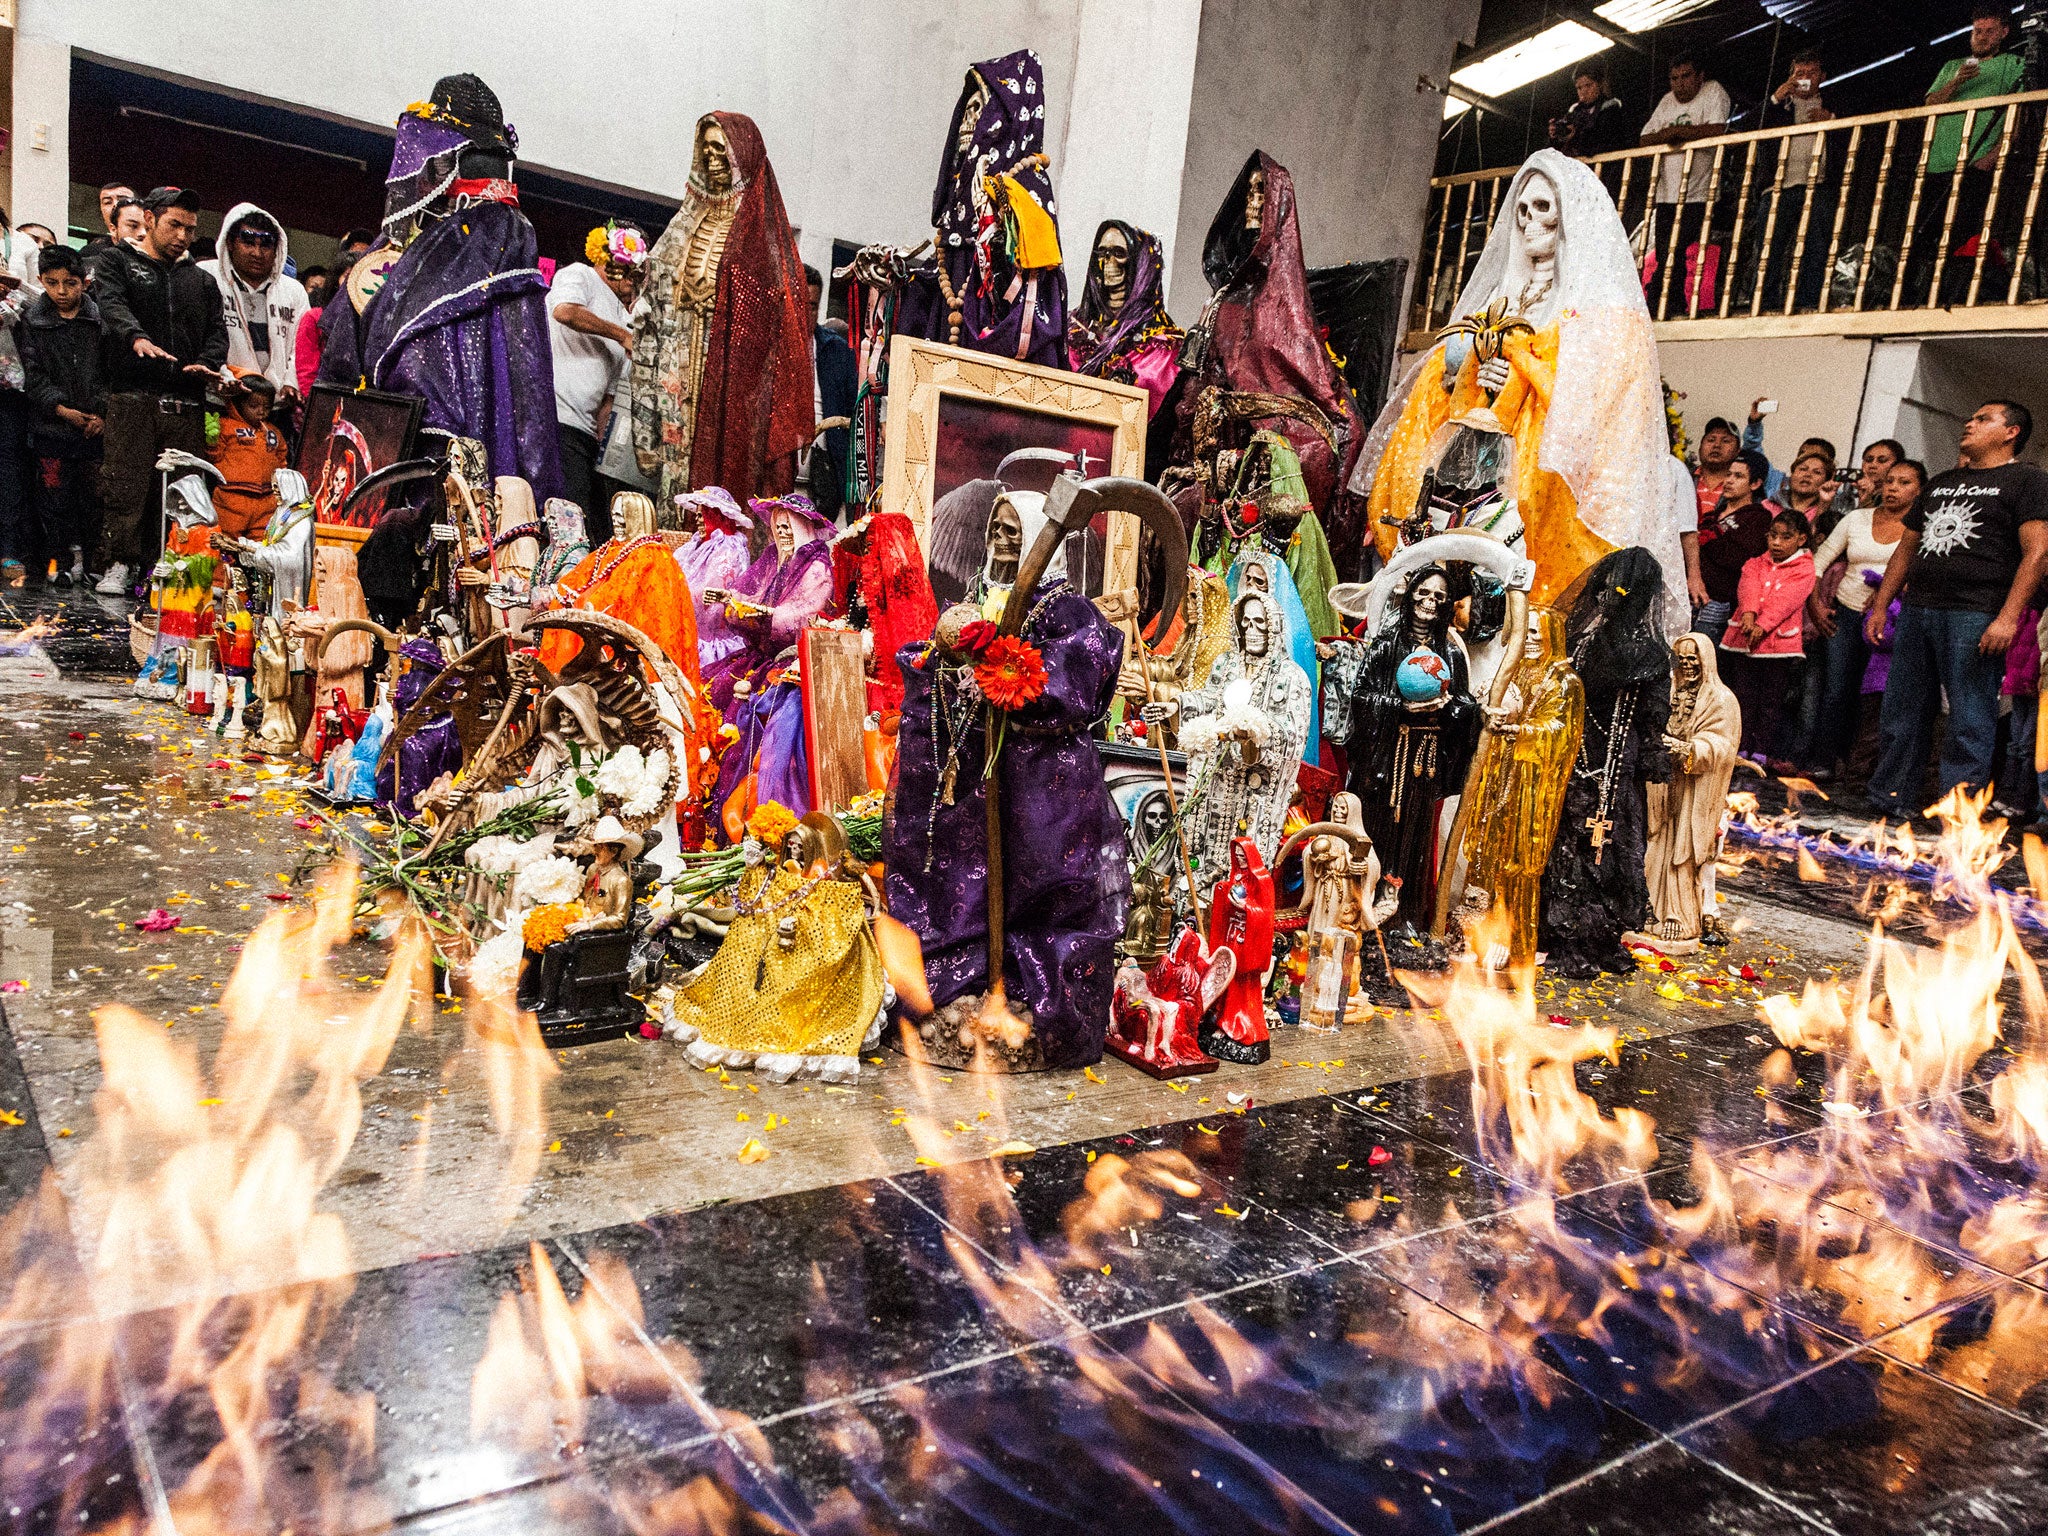 'Baptism of Fire, Pachuca, Mexico' - Santa Muerte statuettes are consecrated and baptised with tequila then set alight